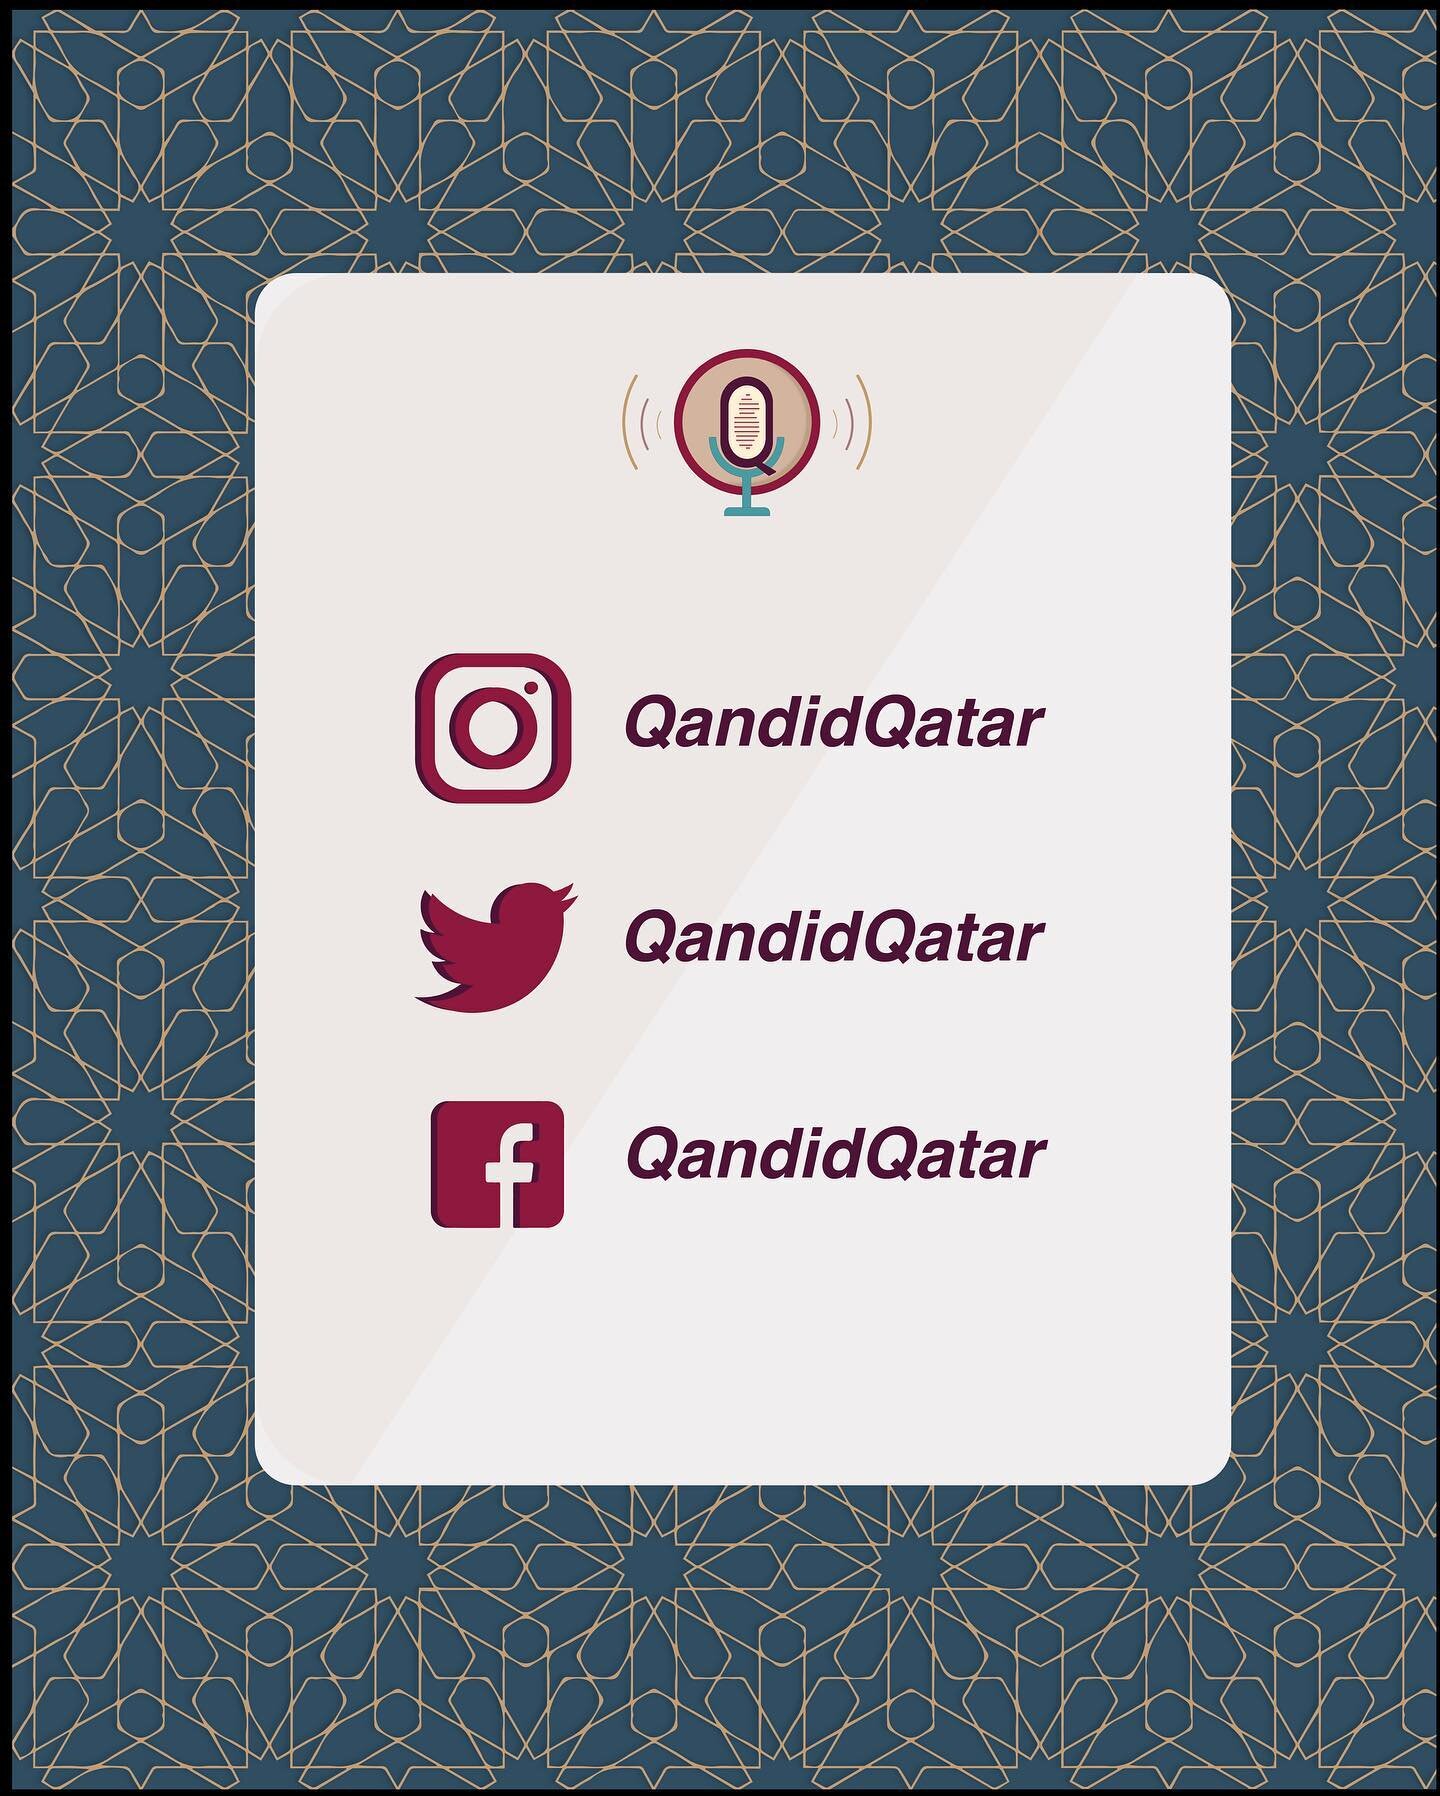 Don&rsquo;t forget to follow us on Facebook and Twitter for more content and inspiring stories 🤗
.
.
.
#podcast #poscasting #podcastlife #podcaster #podcastersofinstagram #music #instagood #instagram #inspiration #inspo #doha #dohaqatar #dohapodcast